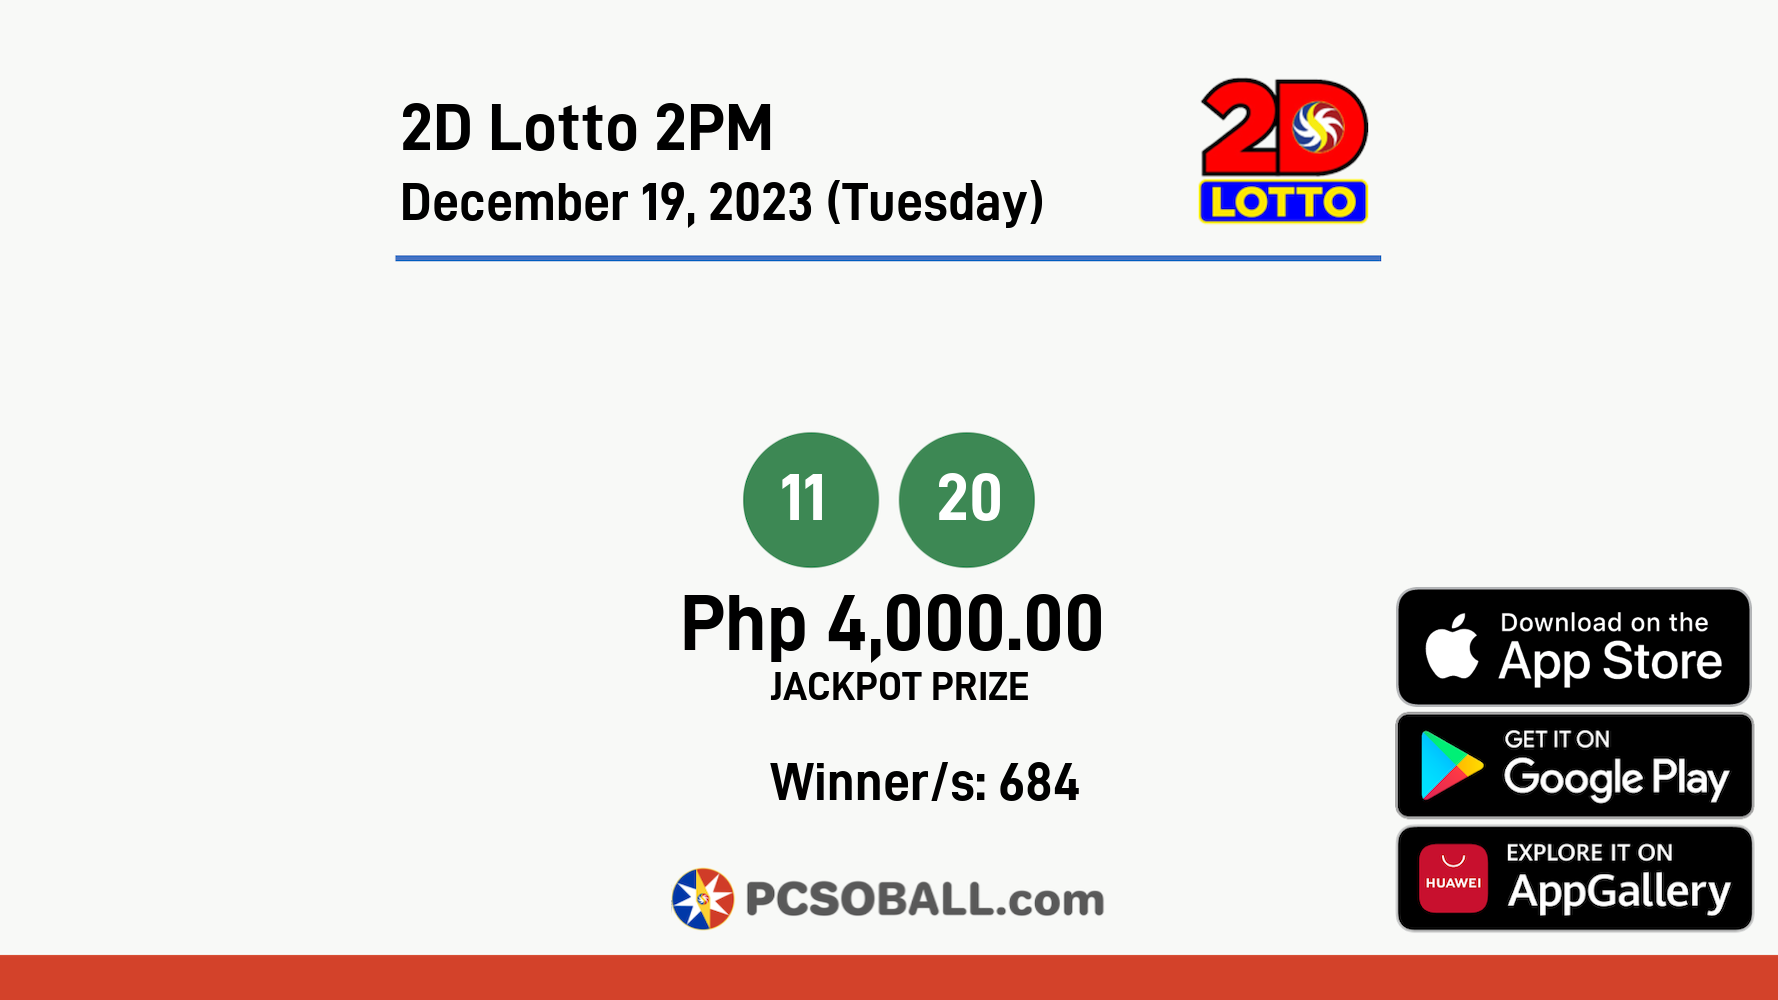 2D Lotto 2PM December 19, 2023 (Tuesday) Result